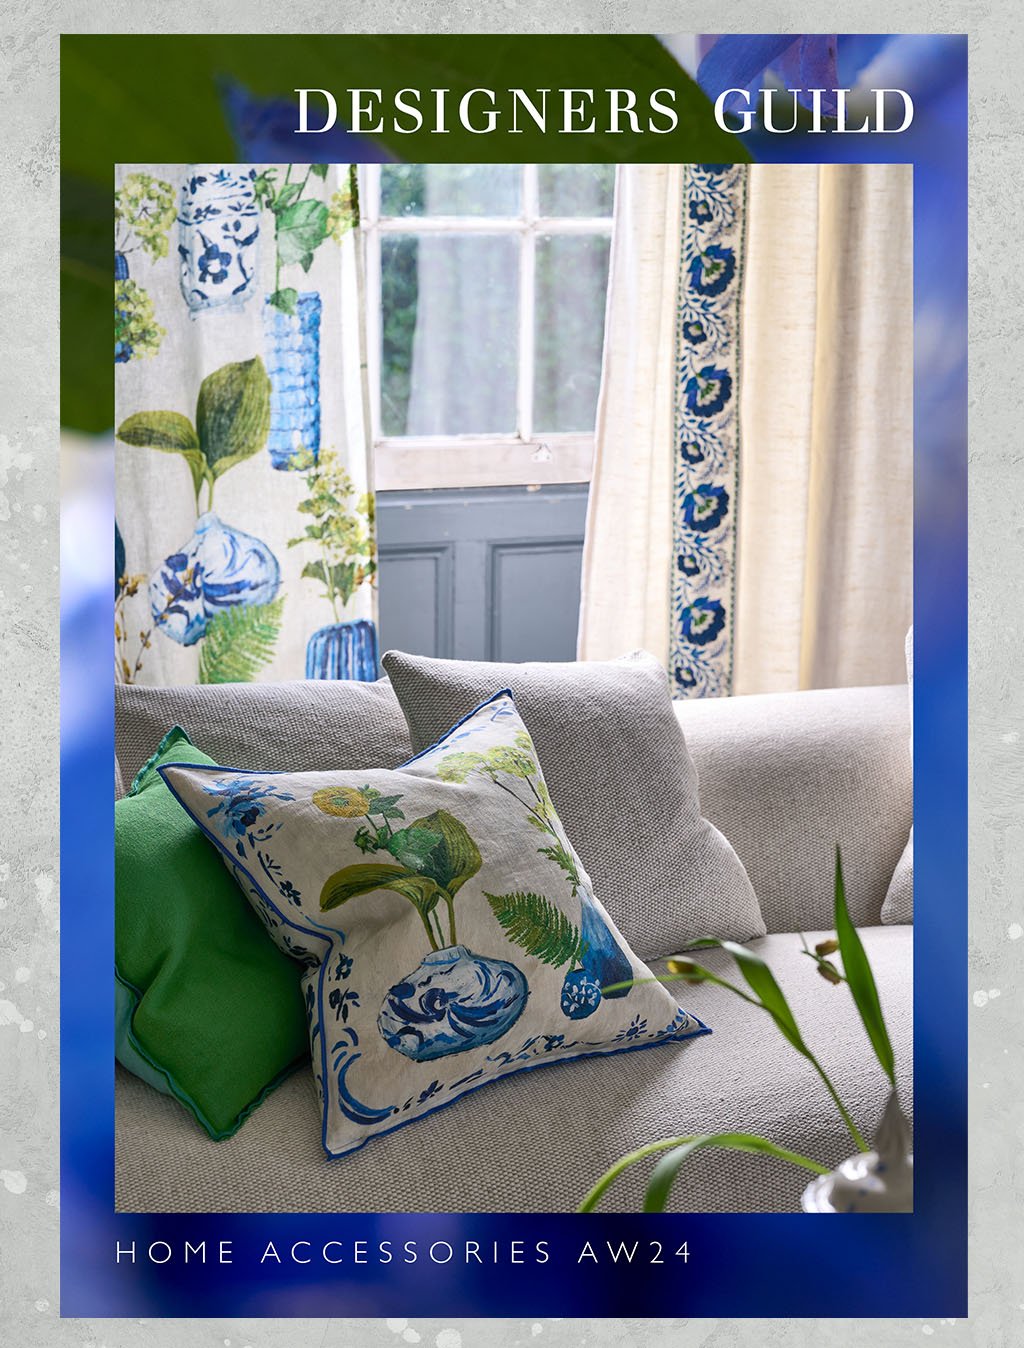 DESIGNERS GUILD HOME ACCESSORIES AW2024